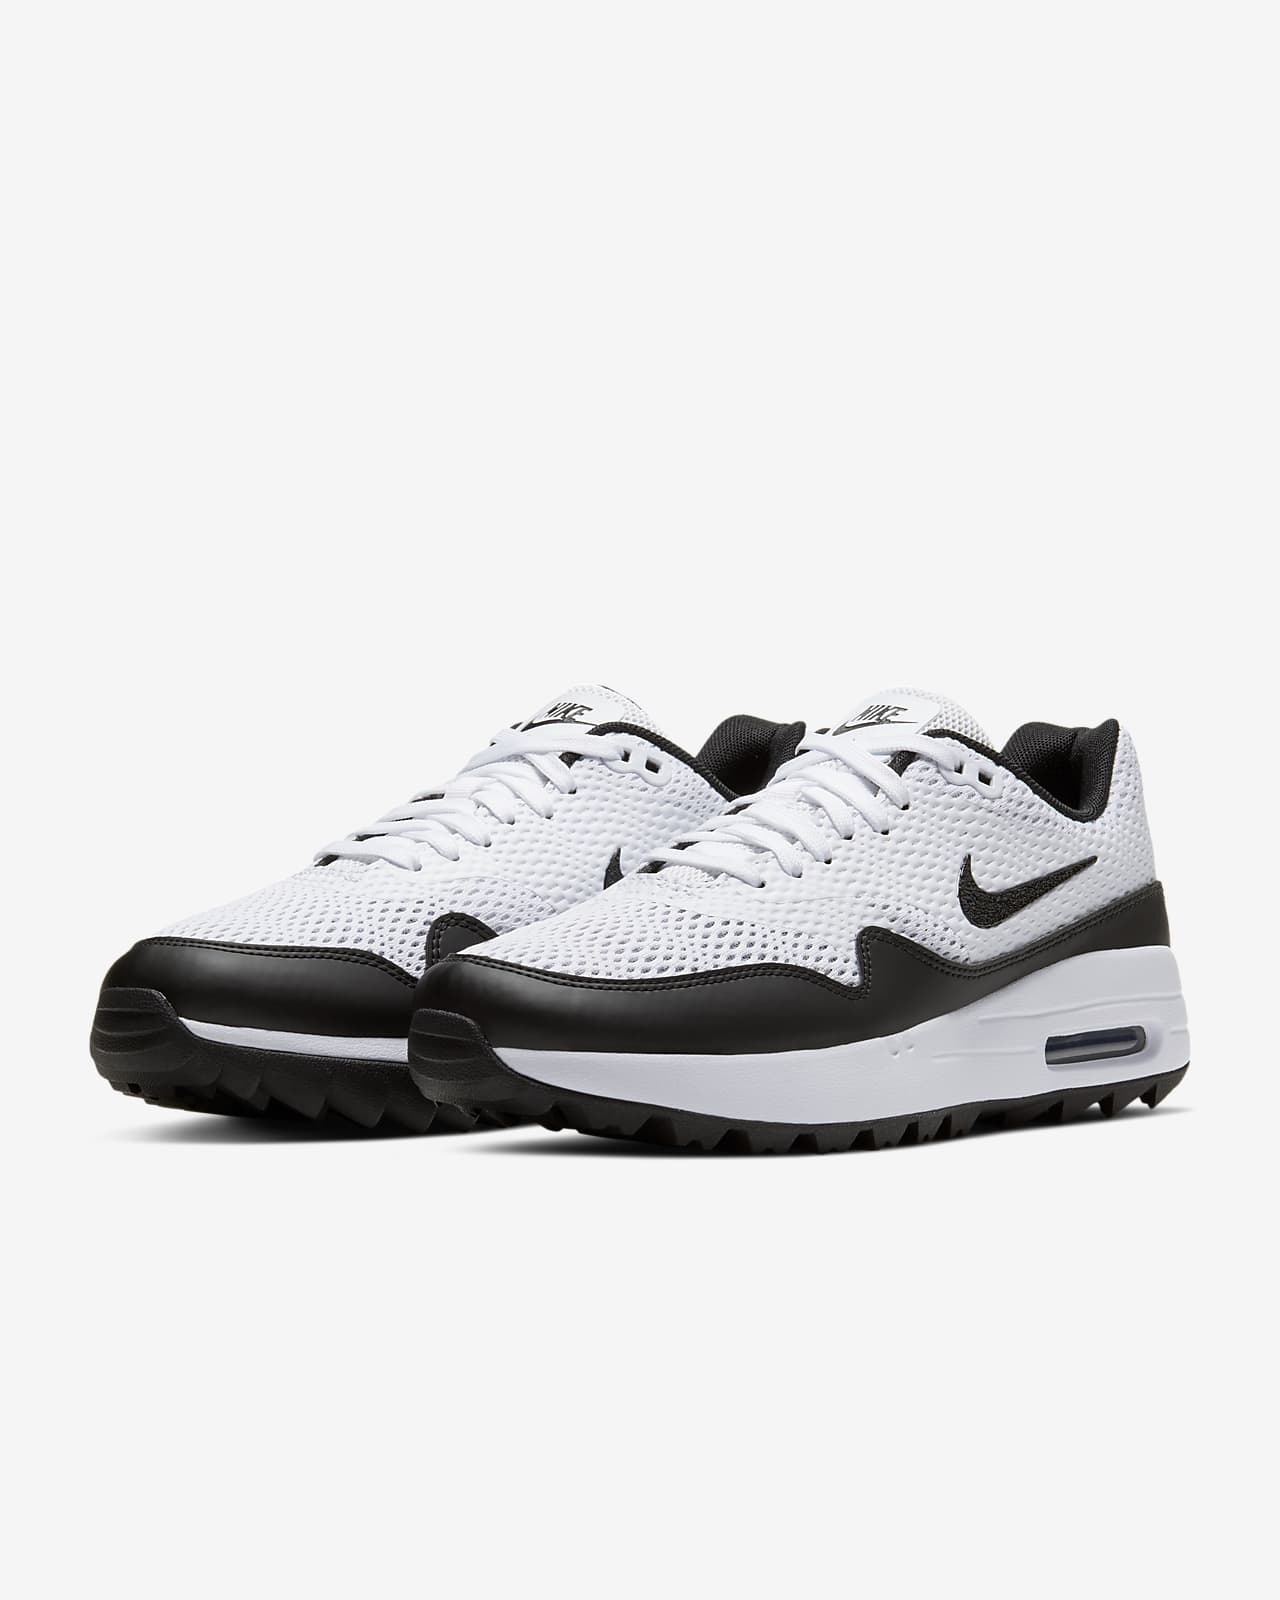 Women's Golf Shoe Nike Air Max 1 G Hot Sale, UP TO 59% OFF